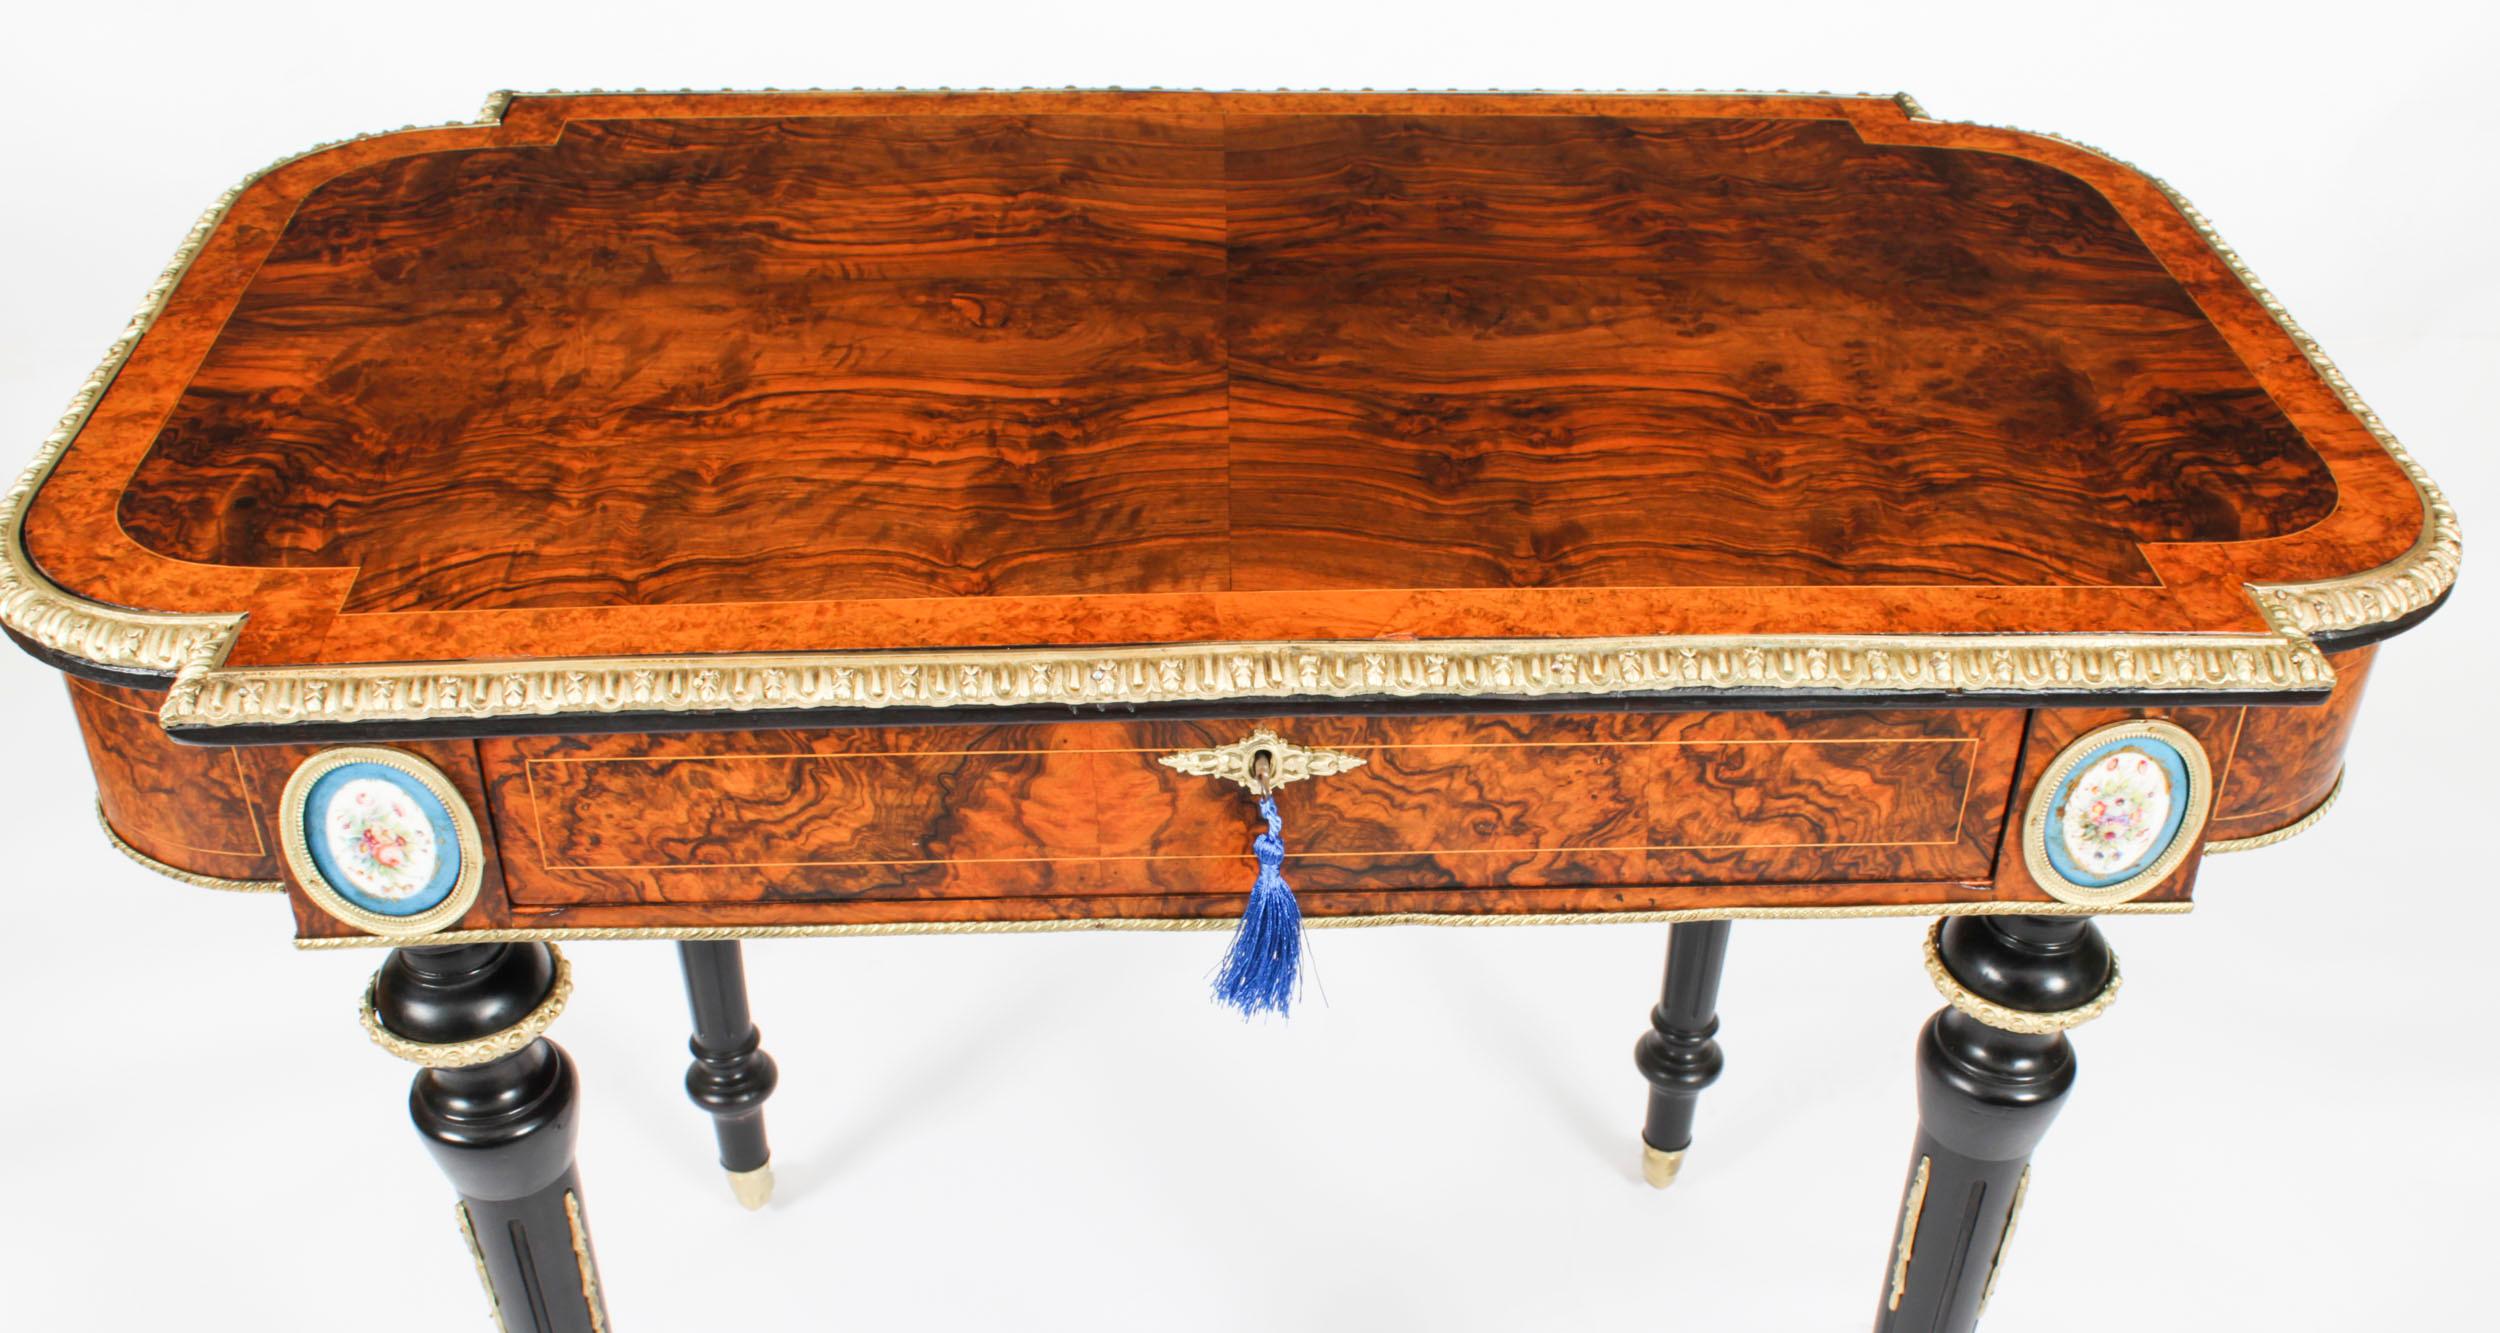 Antique French Burr Walnut Sevres & Ormolu Mounted Writing Table Desk 19th C For Sale 2